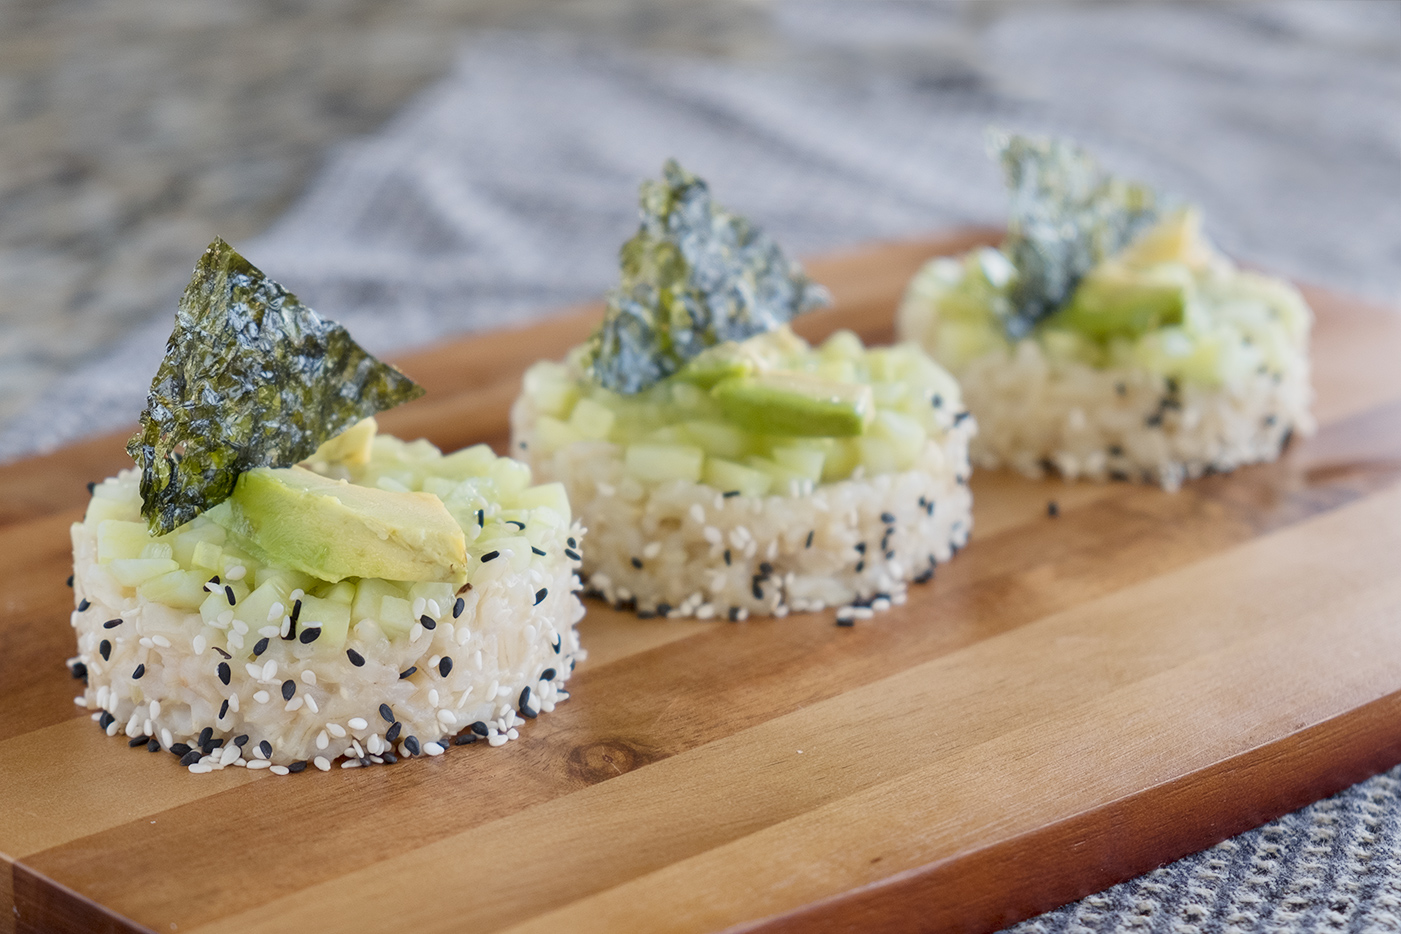 Asian Fusion meets fresh; the perfect balance of a Sushi themed delight with fresh cucumber & avocado to create an explosion of exceptional flavors. 